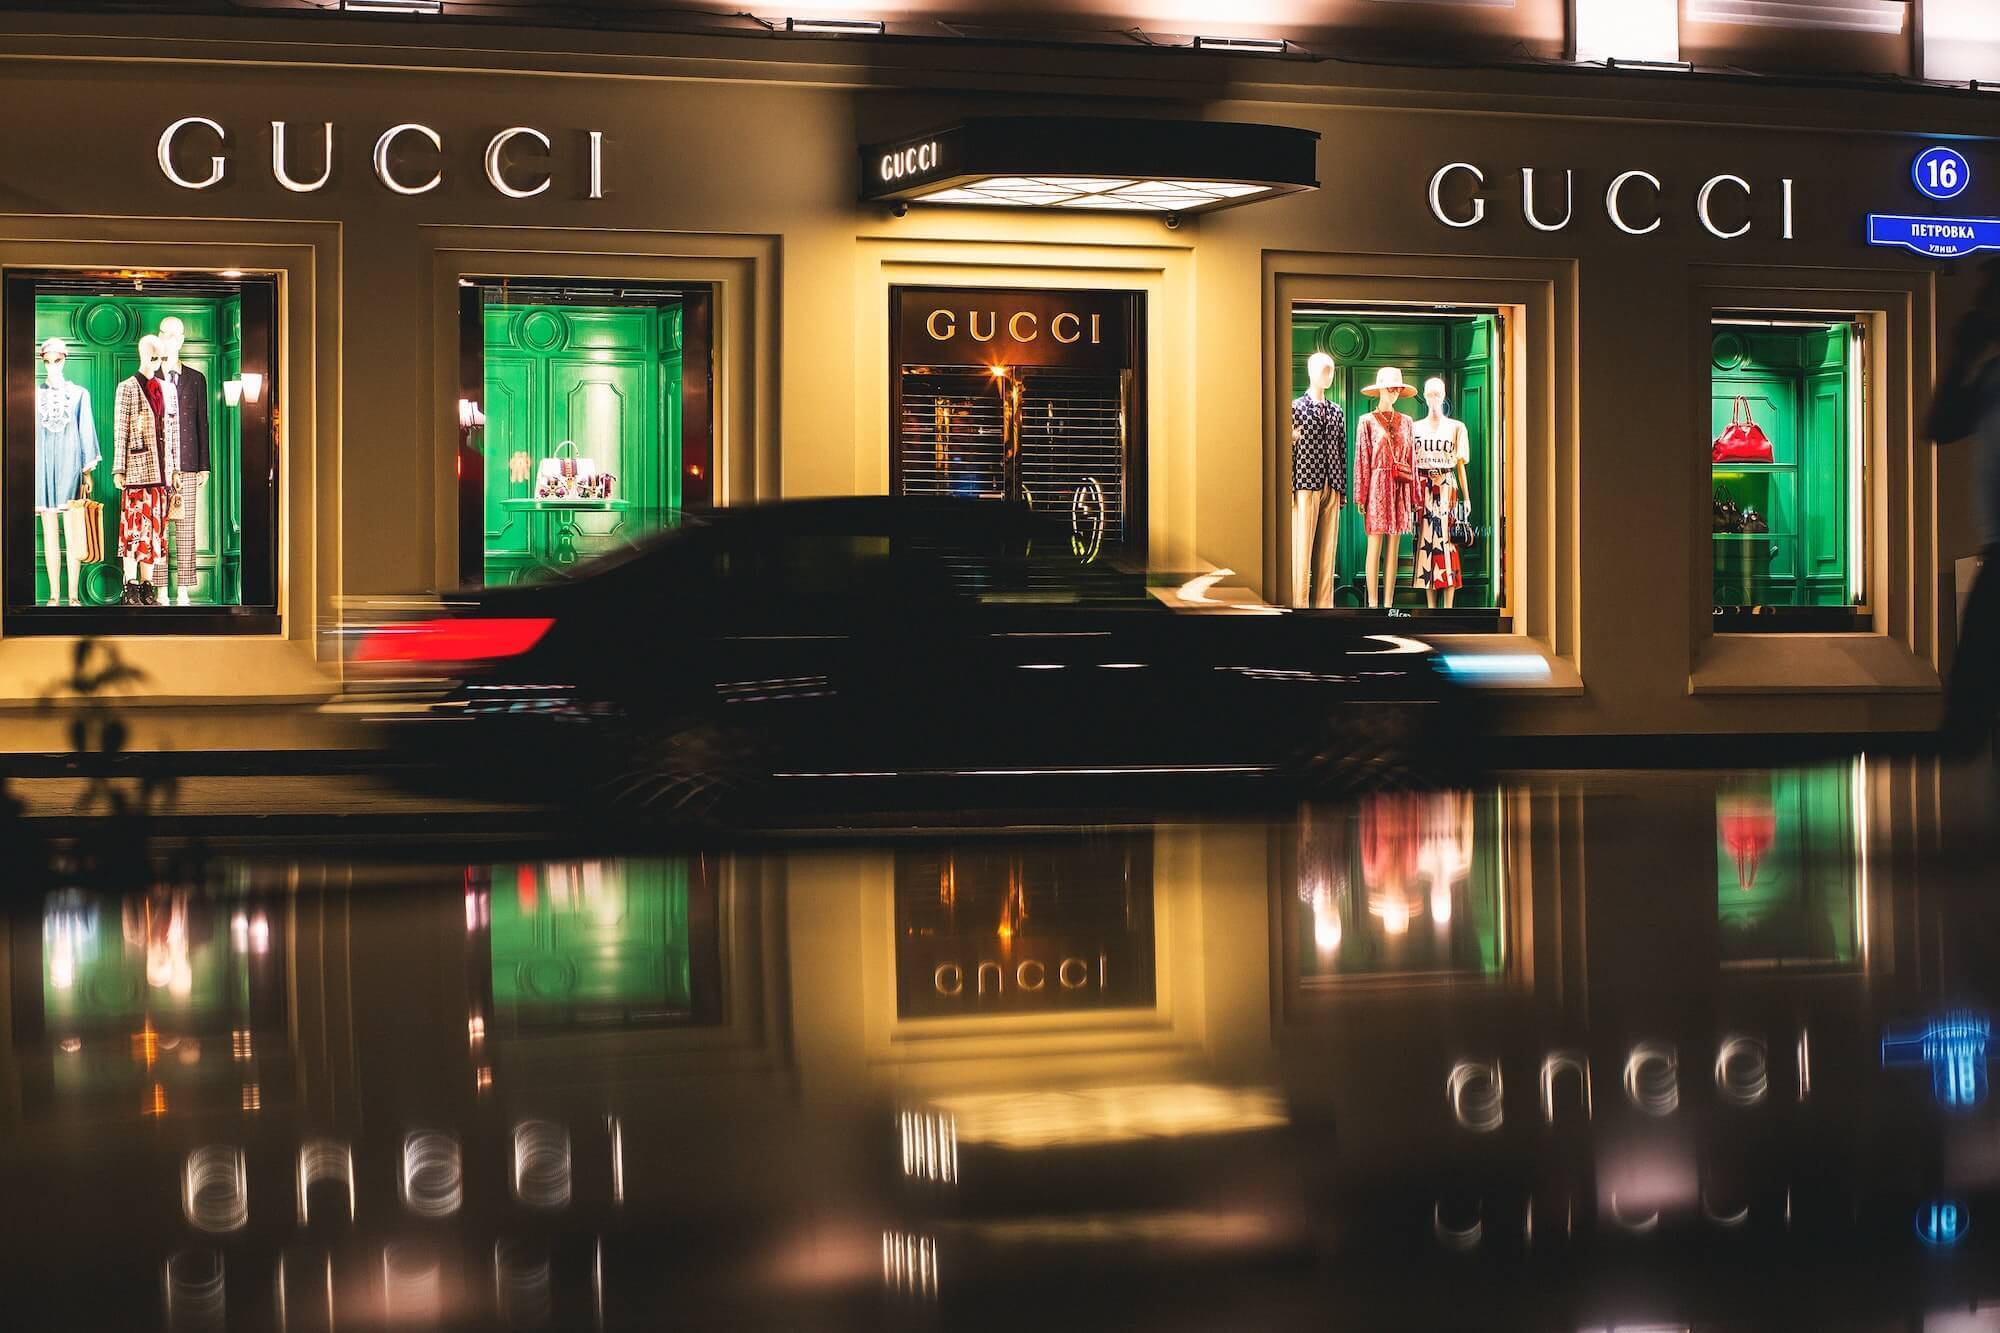 Nighttime shot of lit-up Gucci storefront with blurred moving car in front